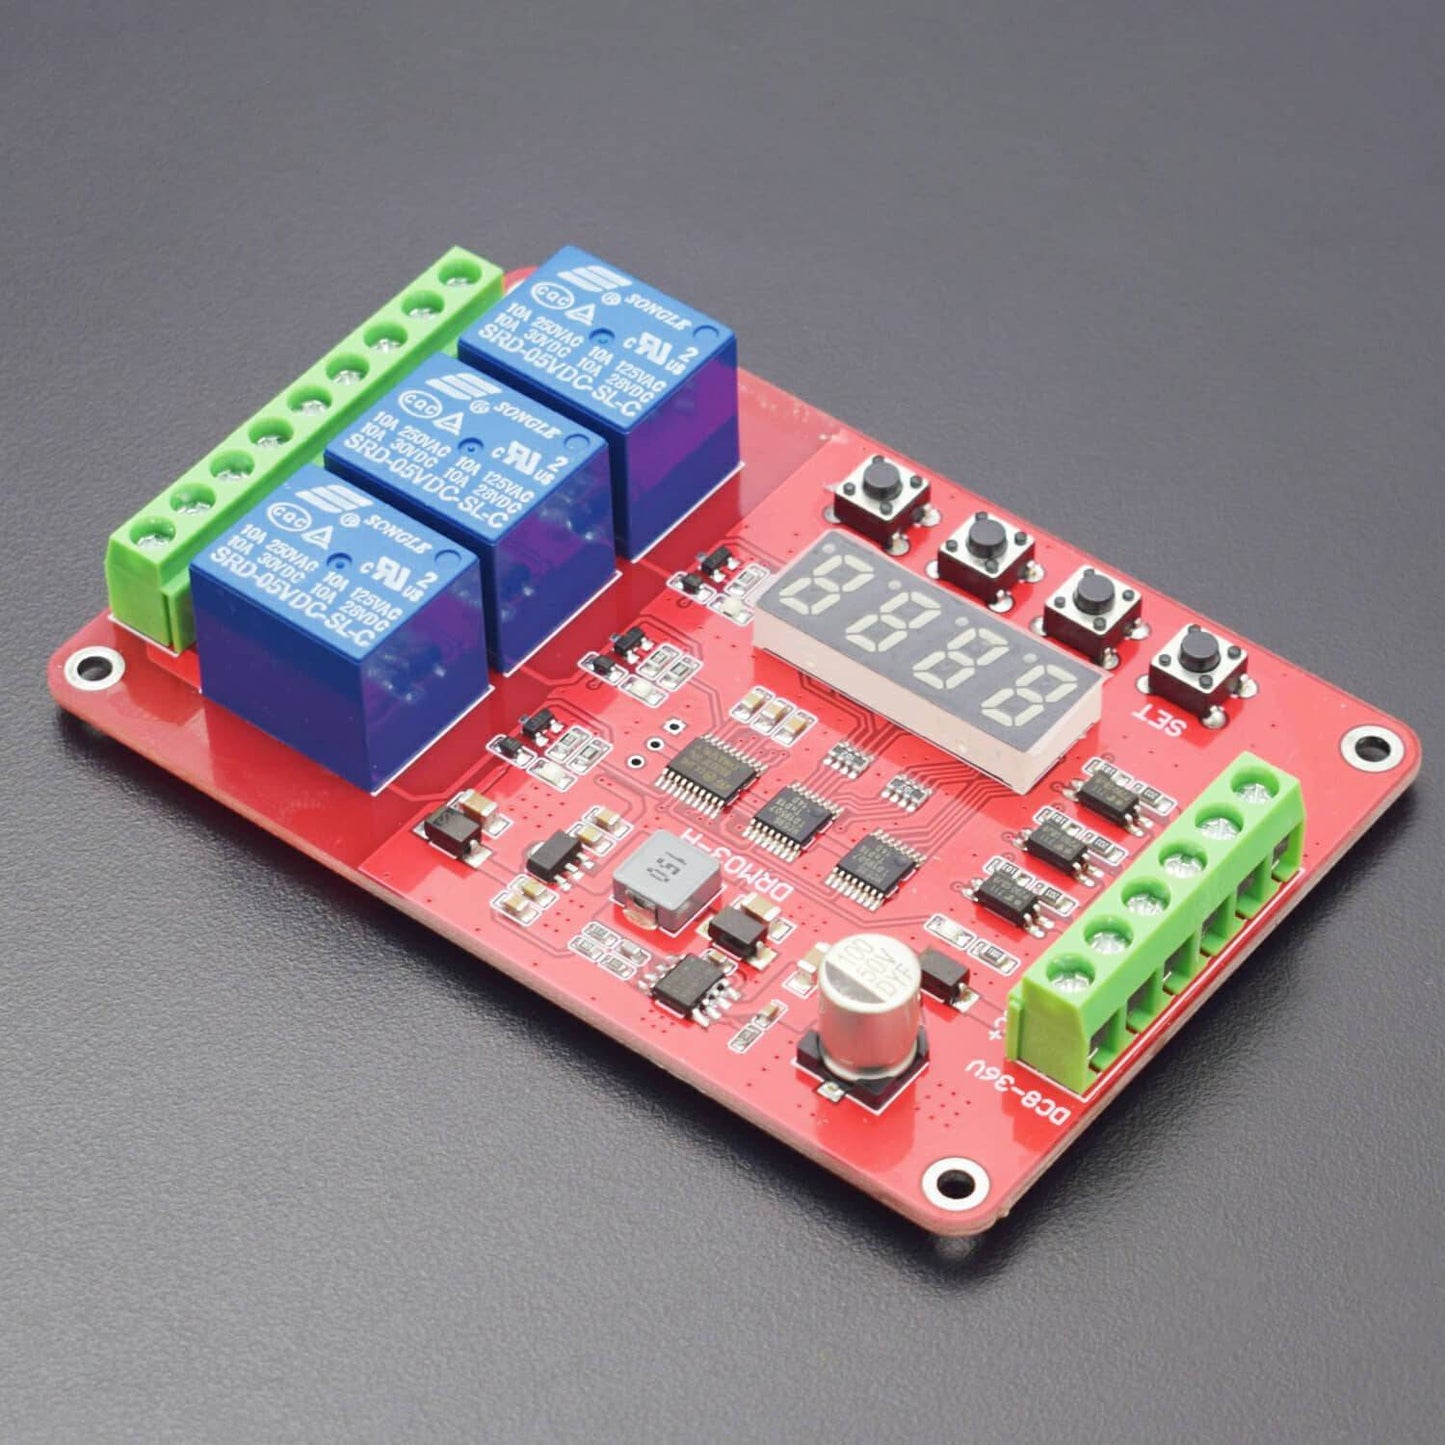 Multifunction Self-Lock Relay Cycle Timer Module PLC Automation Delay FRM03 8V-32V - RS1796 - REES52